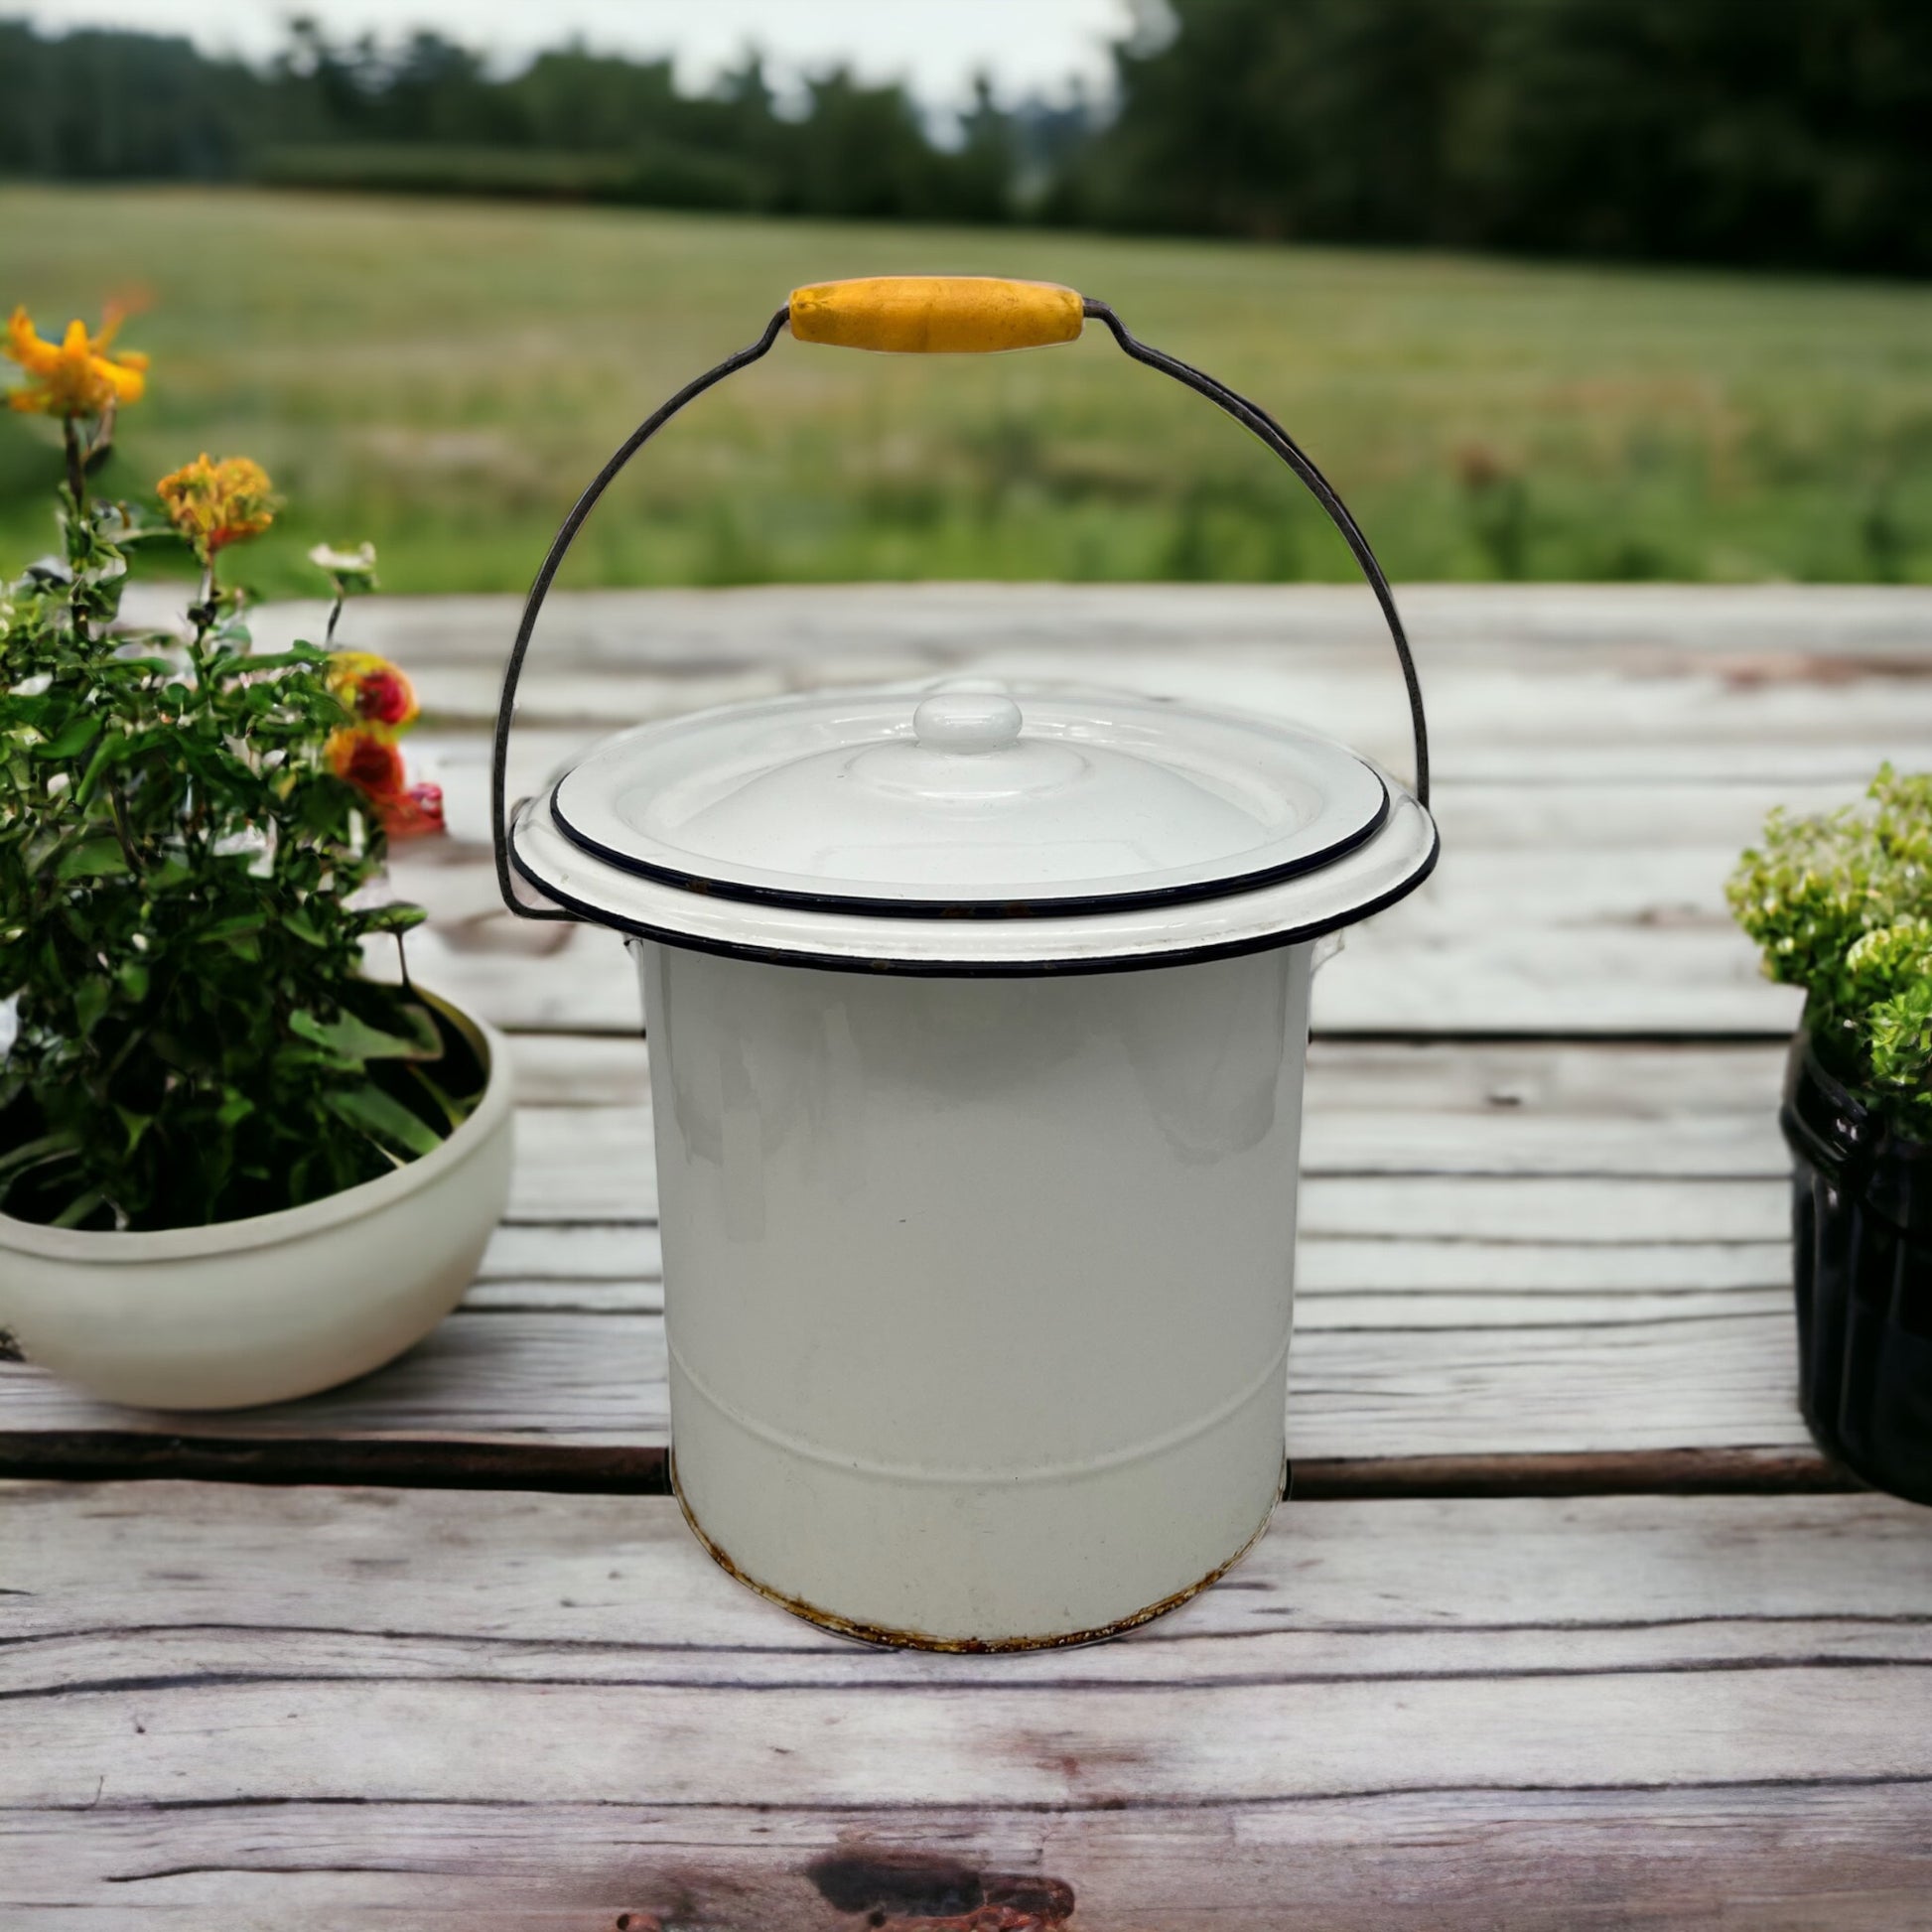 image French vintage enamel lidded bucket on a wooden table with a garden in the background